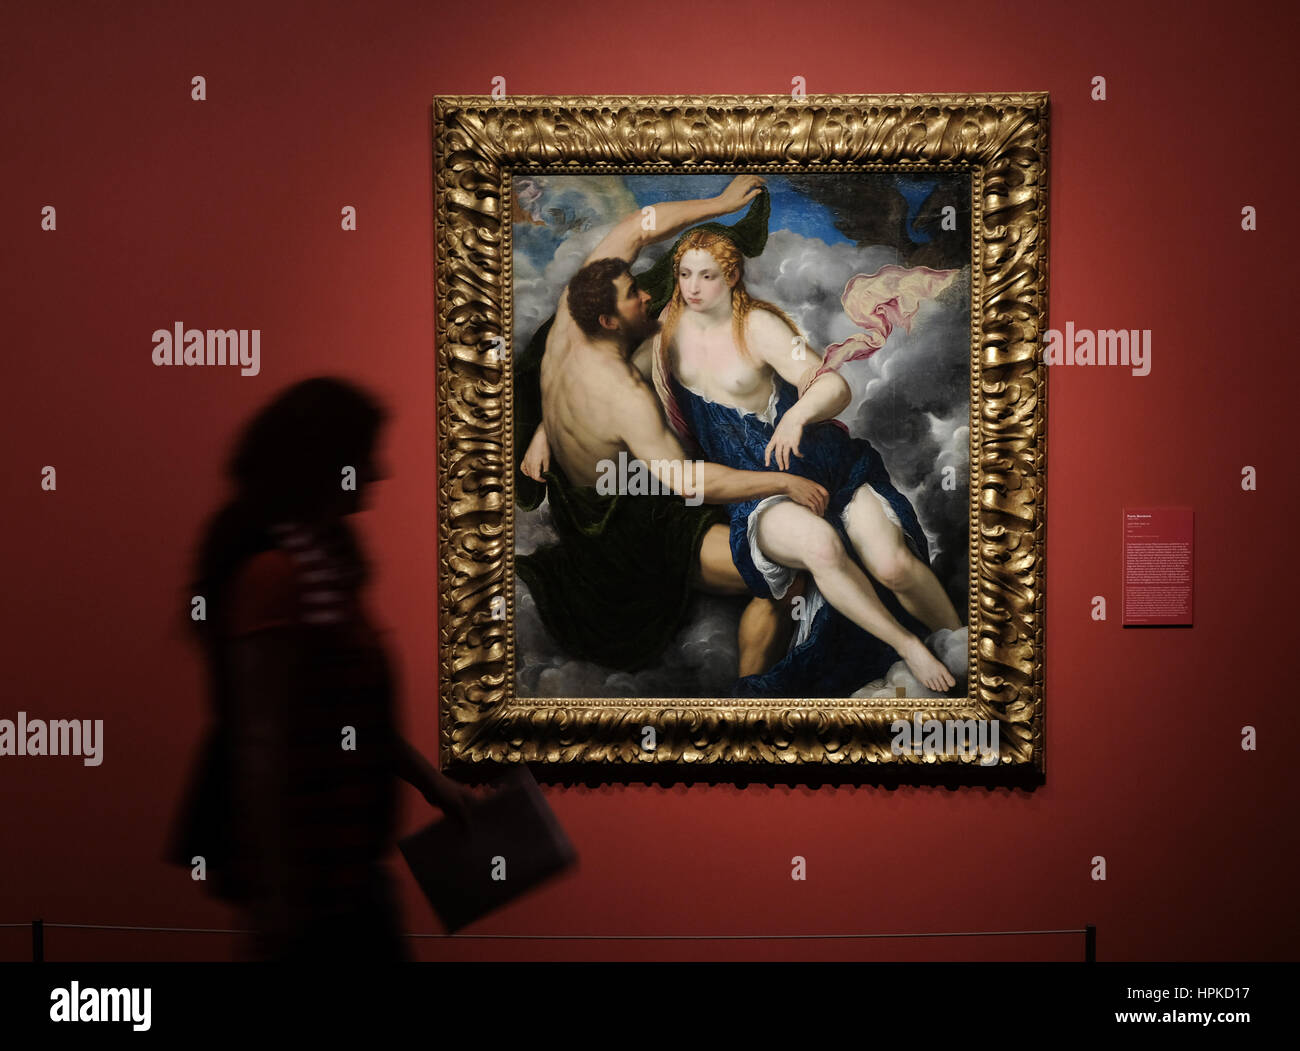 A woman looks at works of art on display as part of an exhibition entitled 'The Poetry of Venetian Painting' in Hamburg, Germany, 23 February 2017. The exhibition will feature the work of artists such as Paris Bordone, Palma il Vecchio and Tizian. The show opens on the 24.02.17 and runs to the 21.05.17. Photo: Axel Heimken/dpa Stock Photo